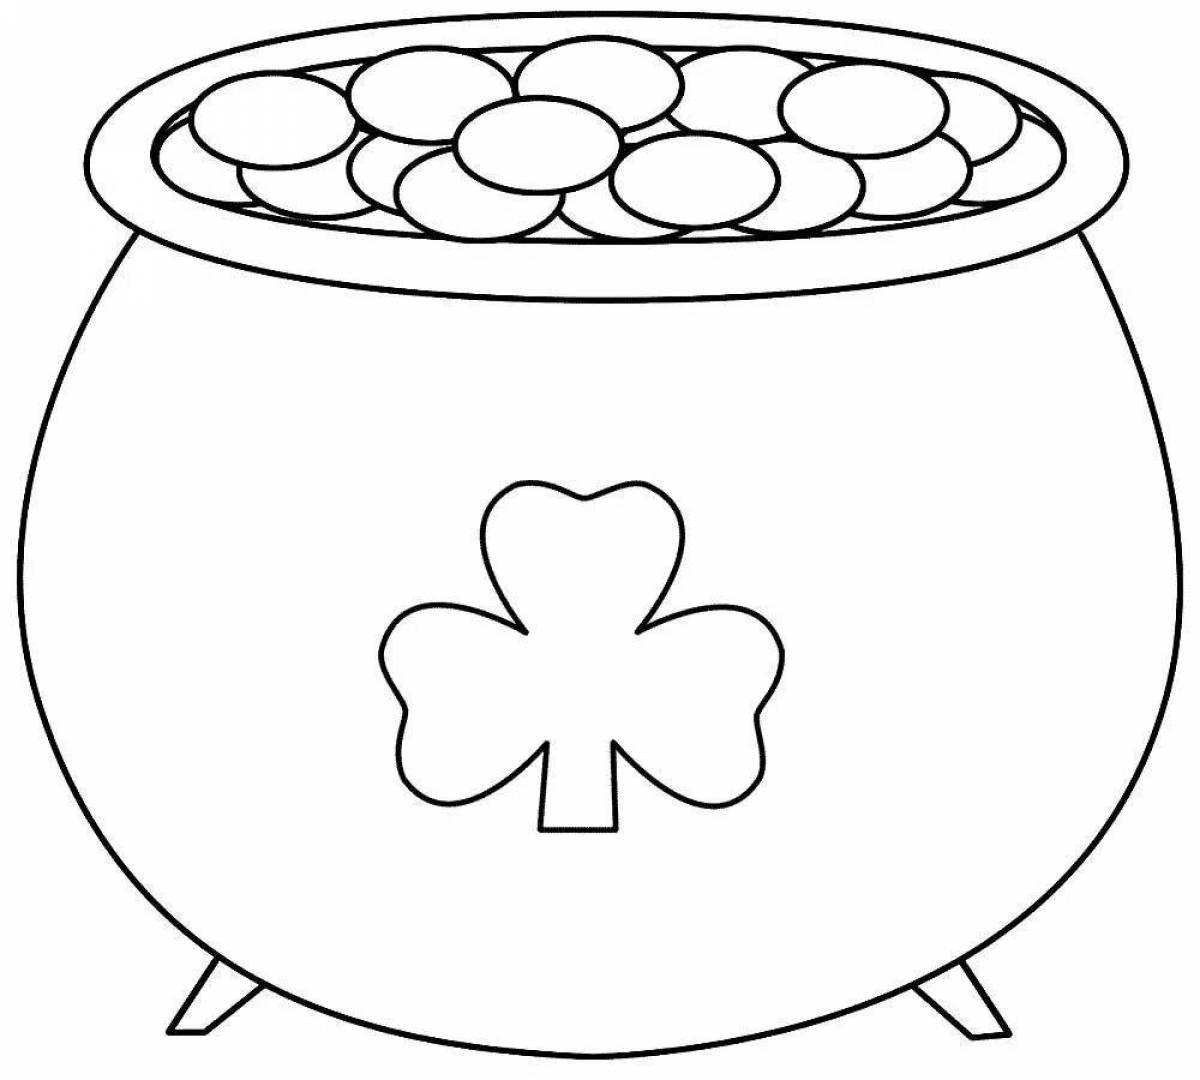 Colour exciting pot coloring page